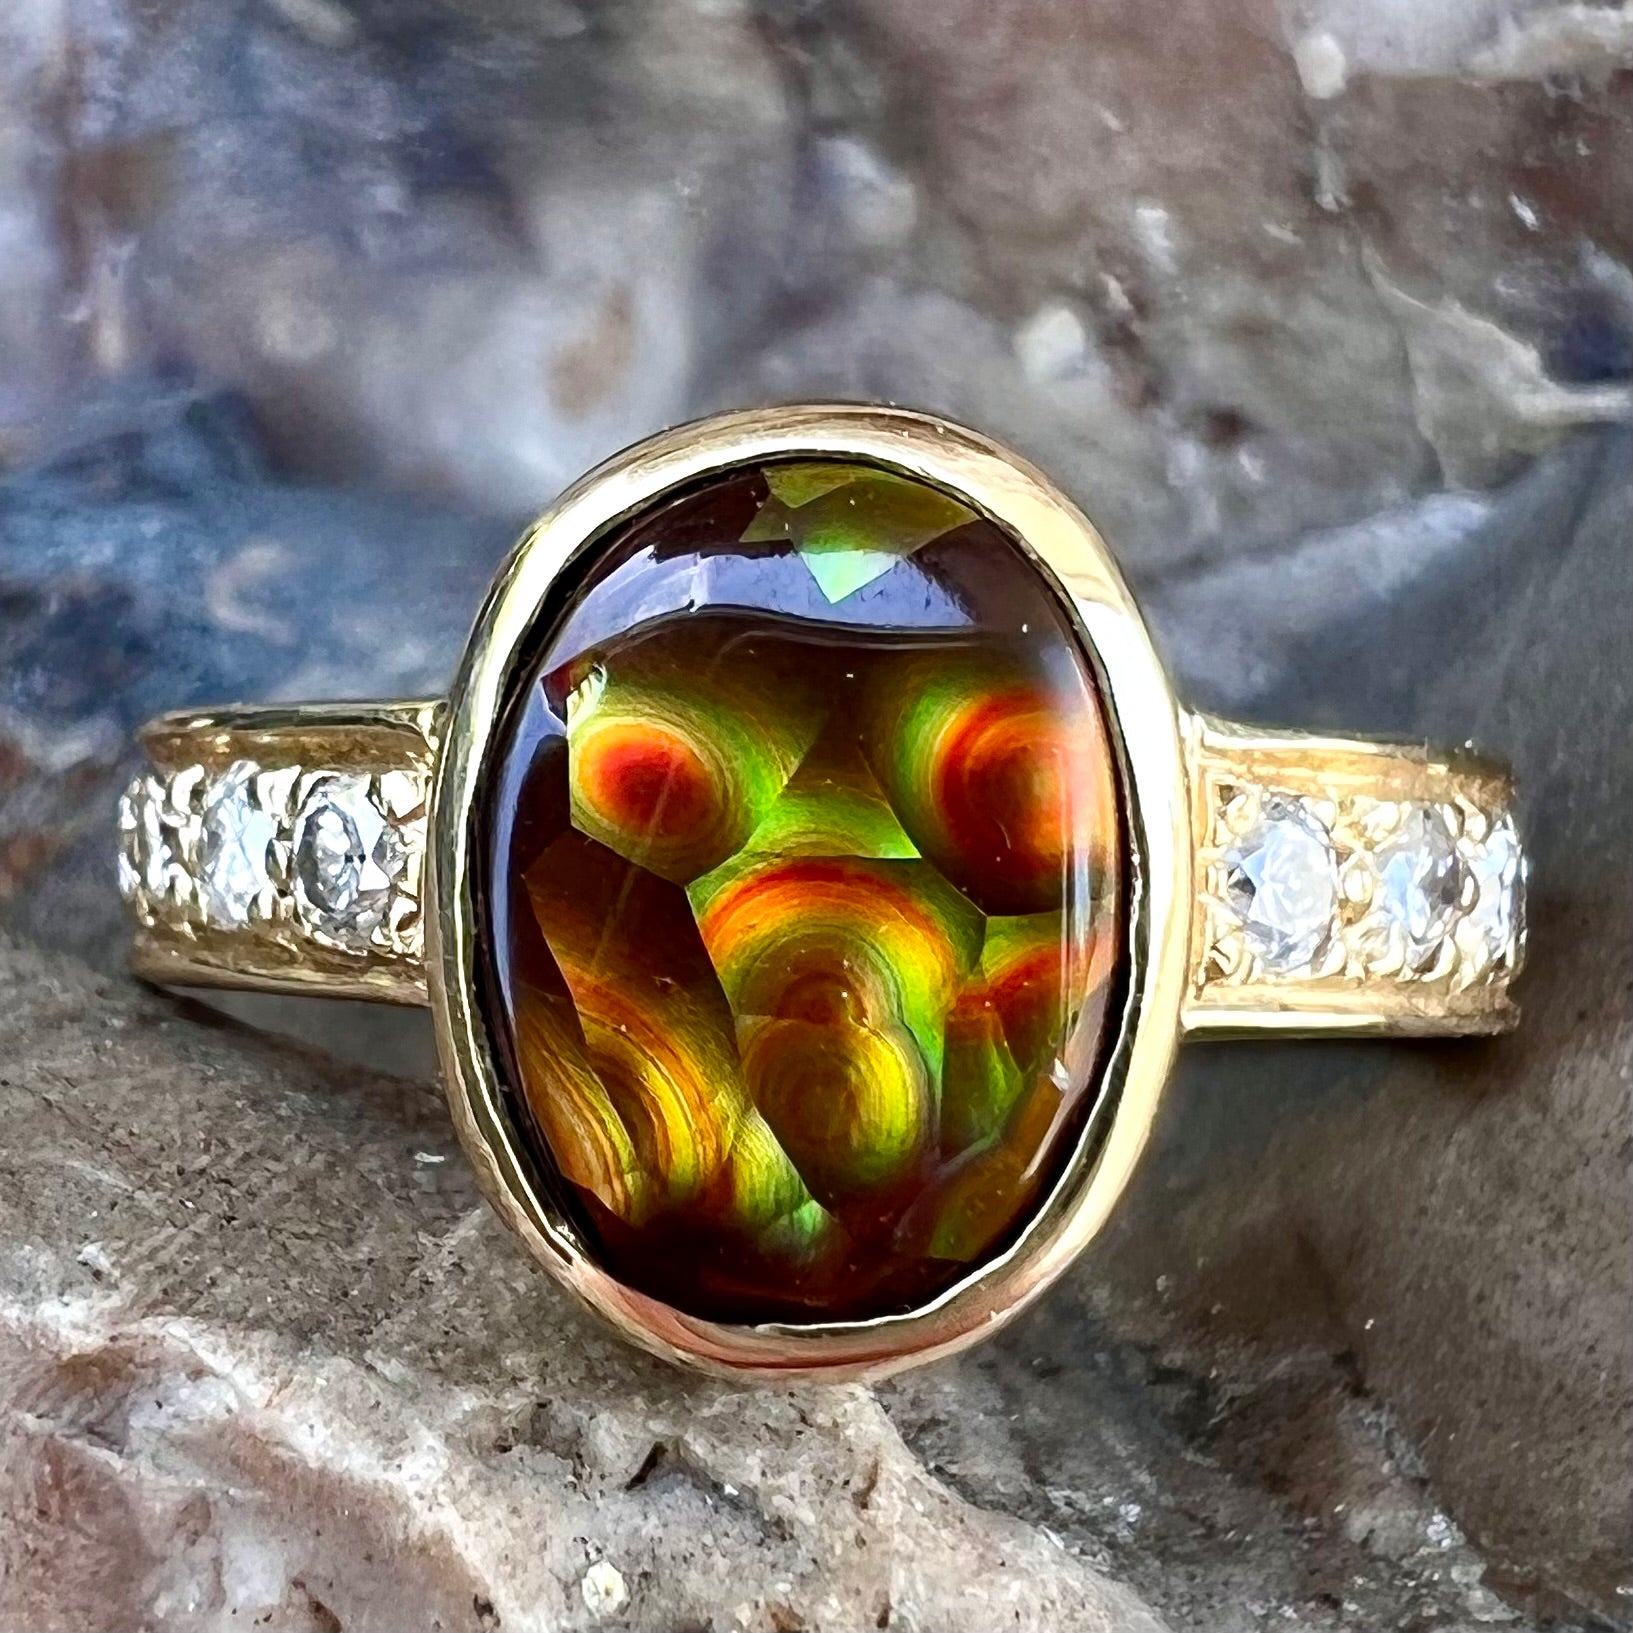 A ladies' gold fire agate and diamond engagement ring.